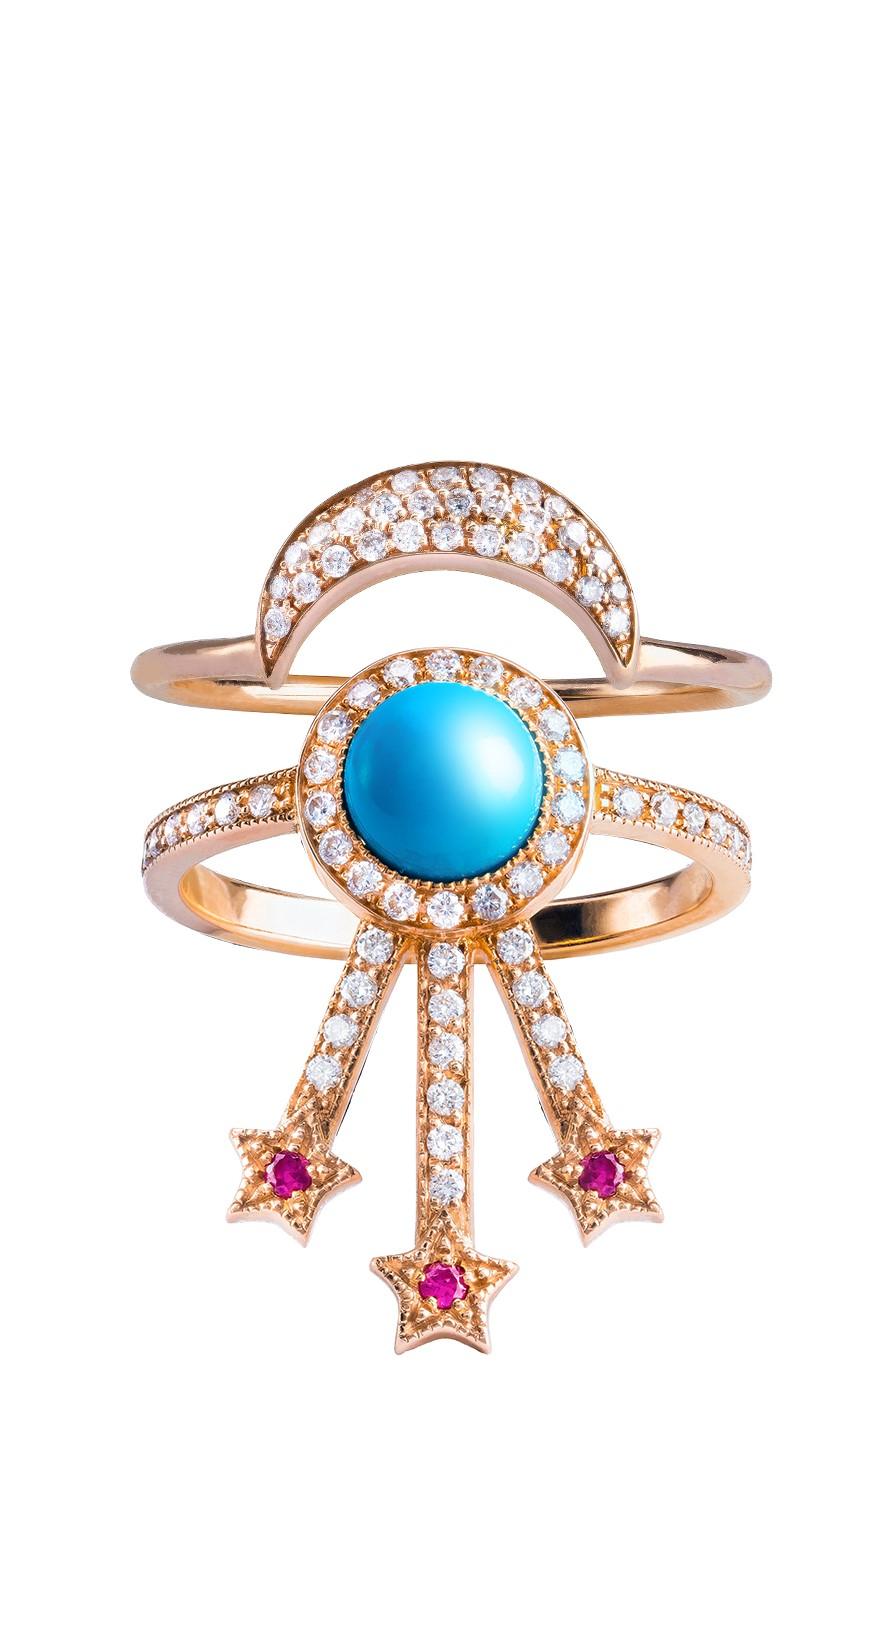 Women's Alcylone Ring, Turquoise, Rubies, 18 Karat Rose Gold For Sale